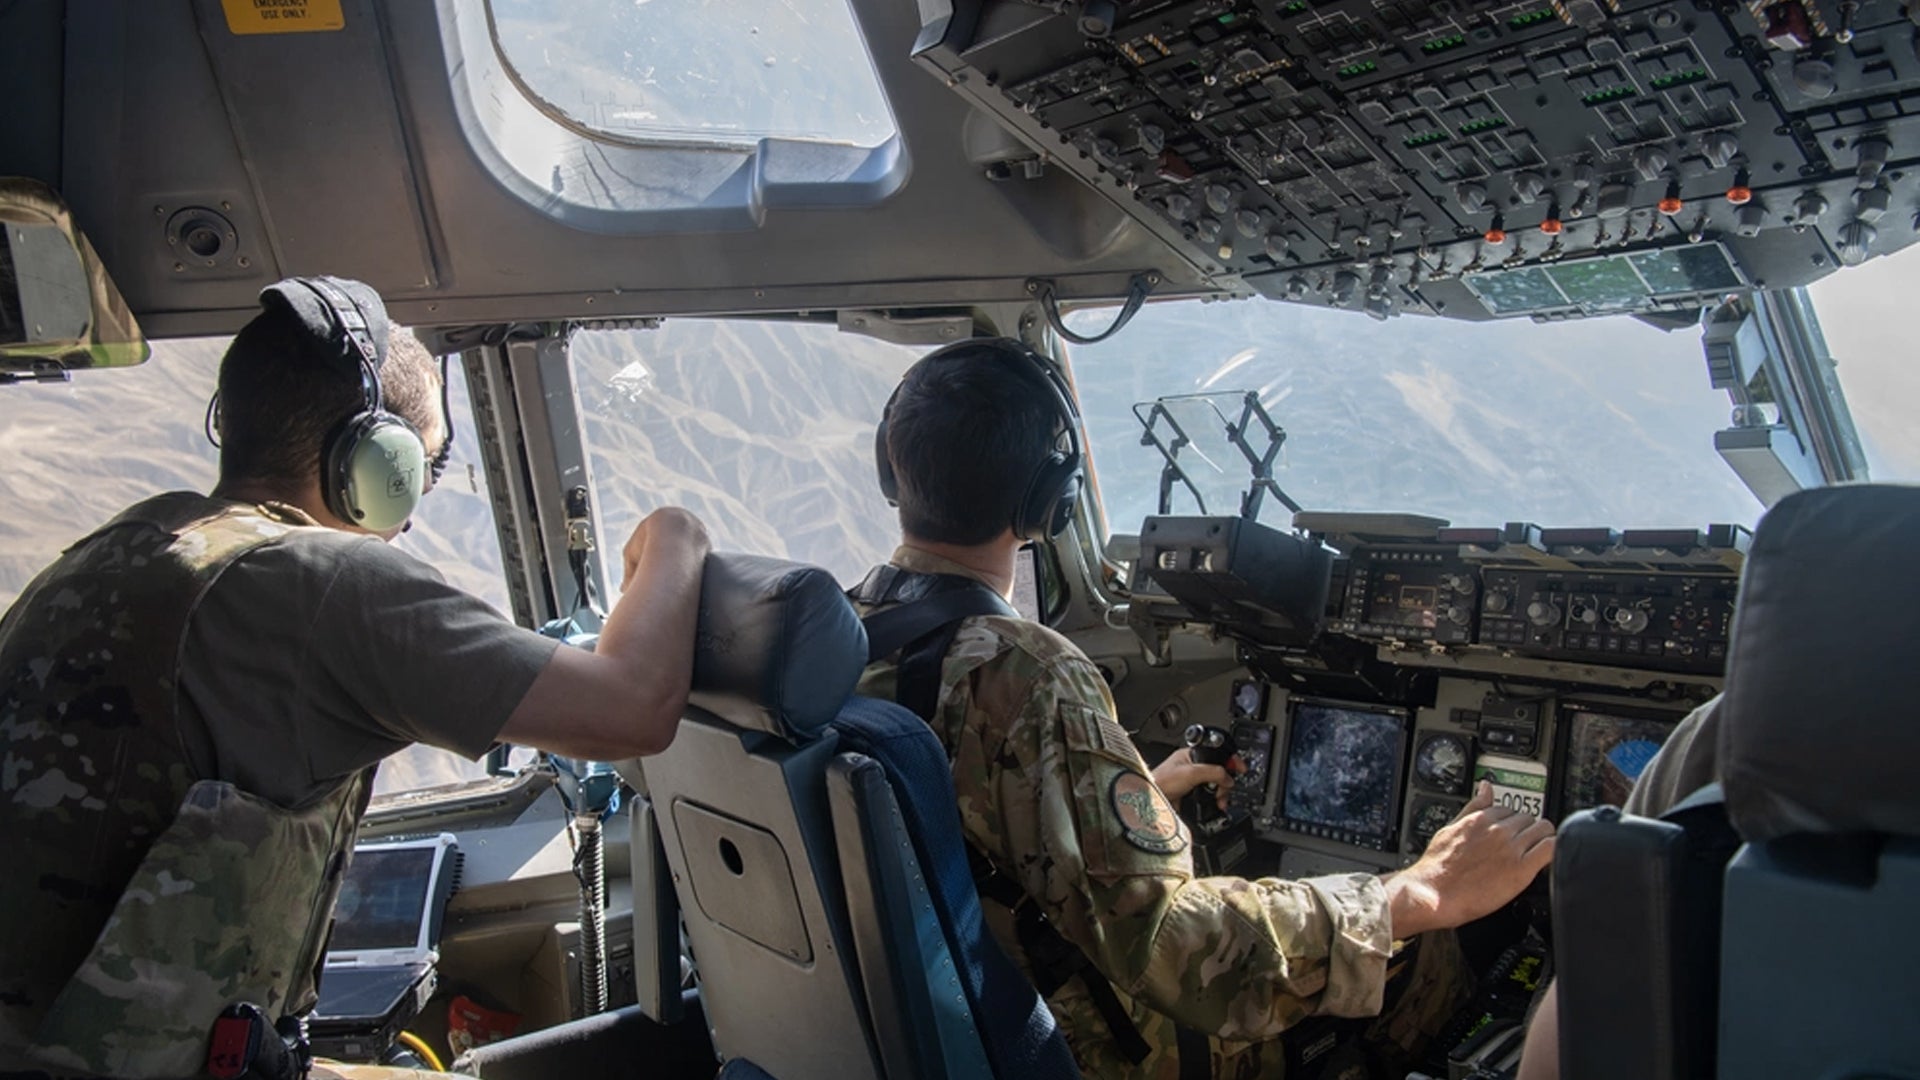 U.S. Air Force C-17 Globemaster III pilots, assigned to the 816th Expeditionary Airlift Squadron, flies a mission in support of the Afghanistan evacuation over the U.S. Central Command area of responsibility, Aug. 24, 2021. (Master Sgt. Donald R. Allen/U.S. Air Force)